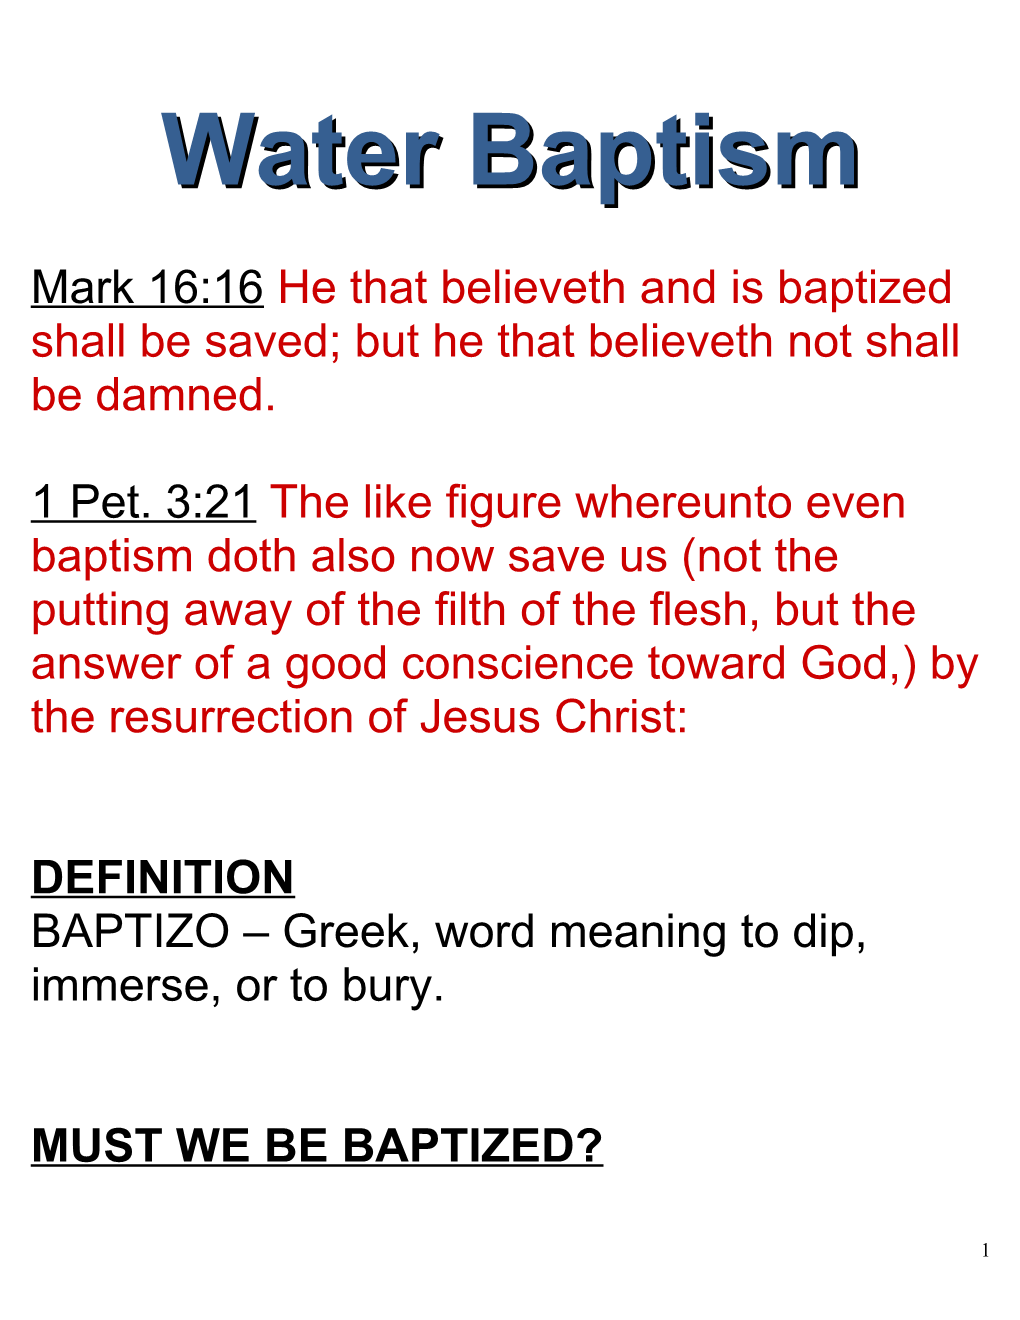 BAPTIZO Greek, Word Meaning to Dip, Immerse, Or to Bury